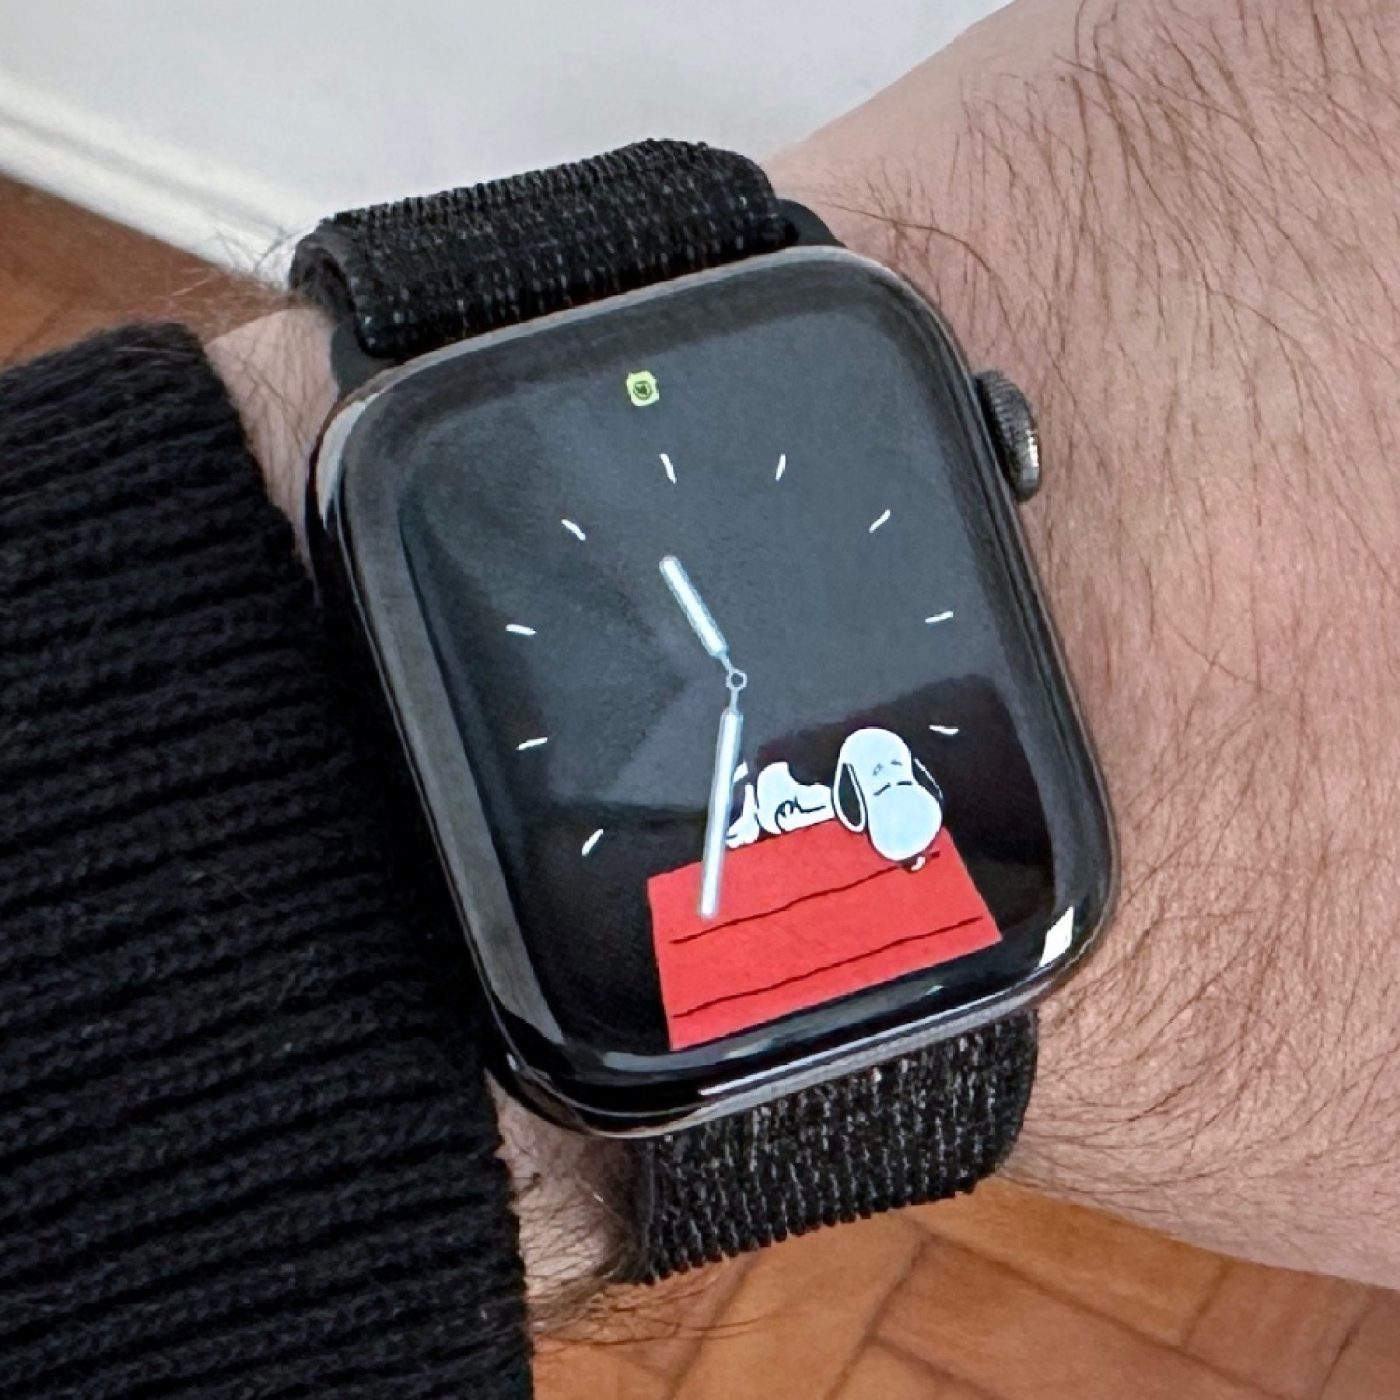 How to Turn Off the “Now Playing” Screen on Your Apple Watch